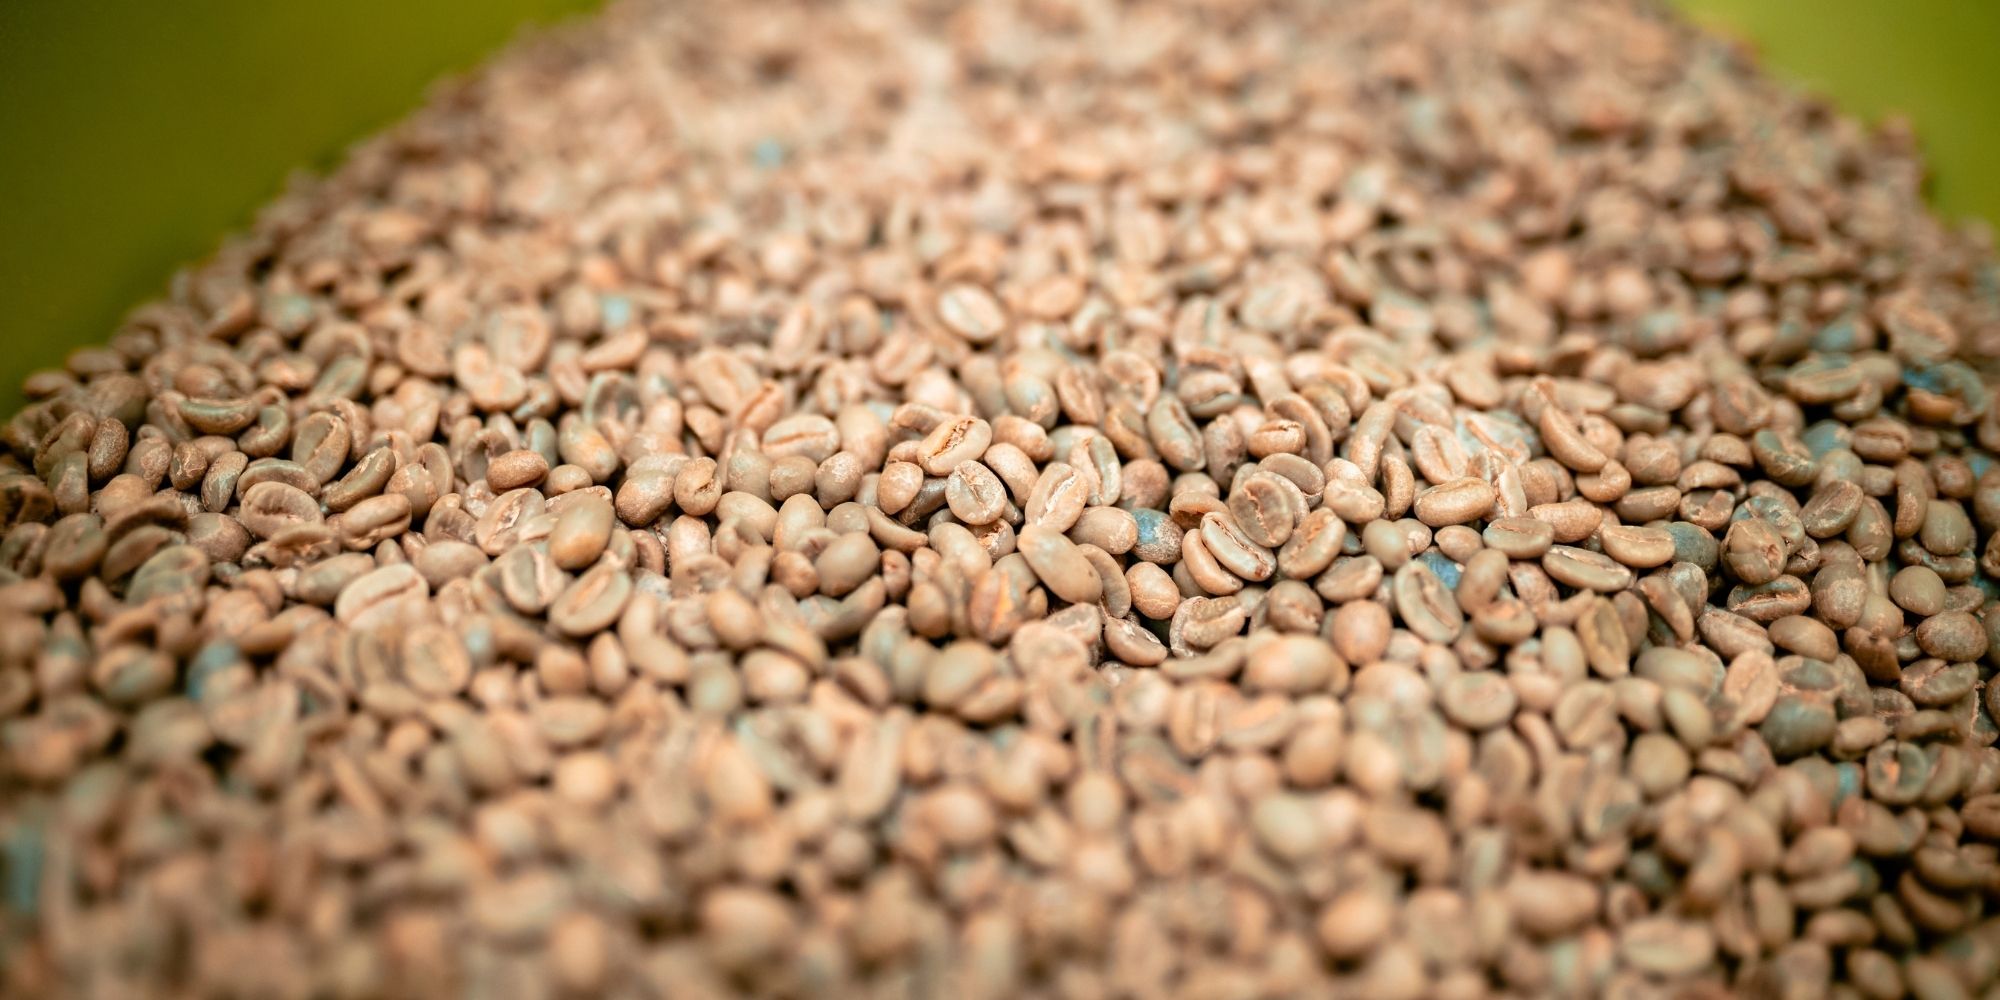 Can You Eat Unroasted Coffee Beans?